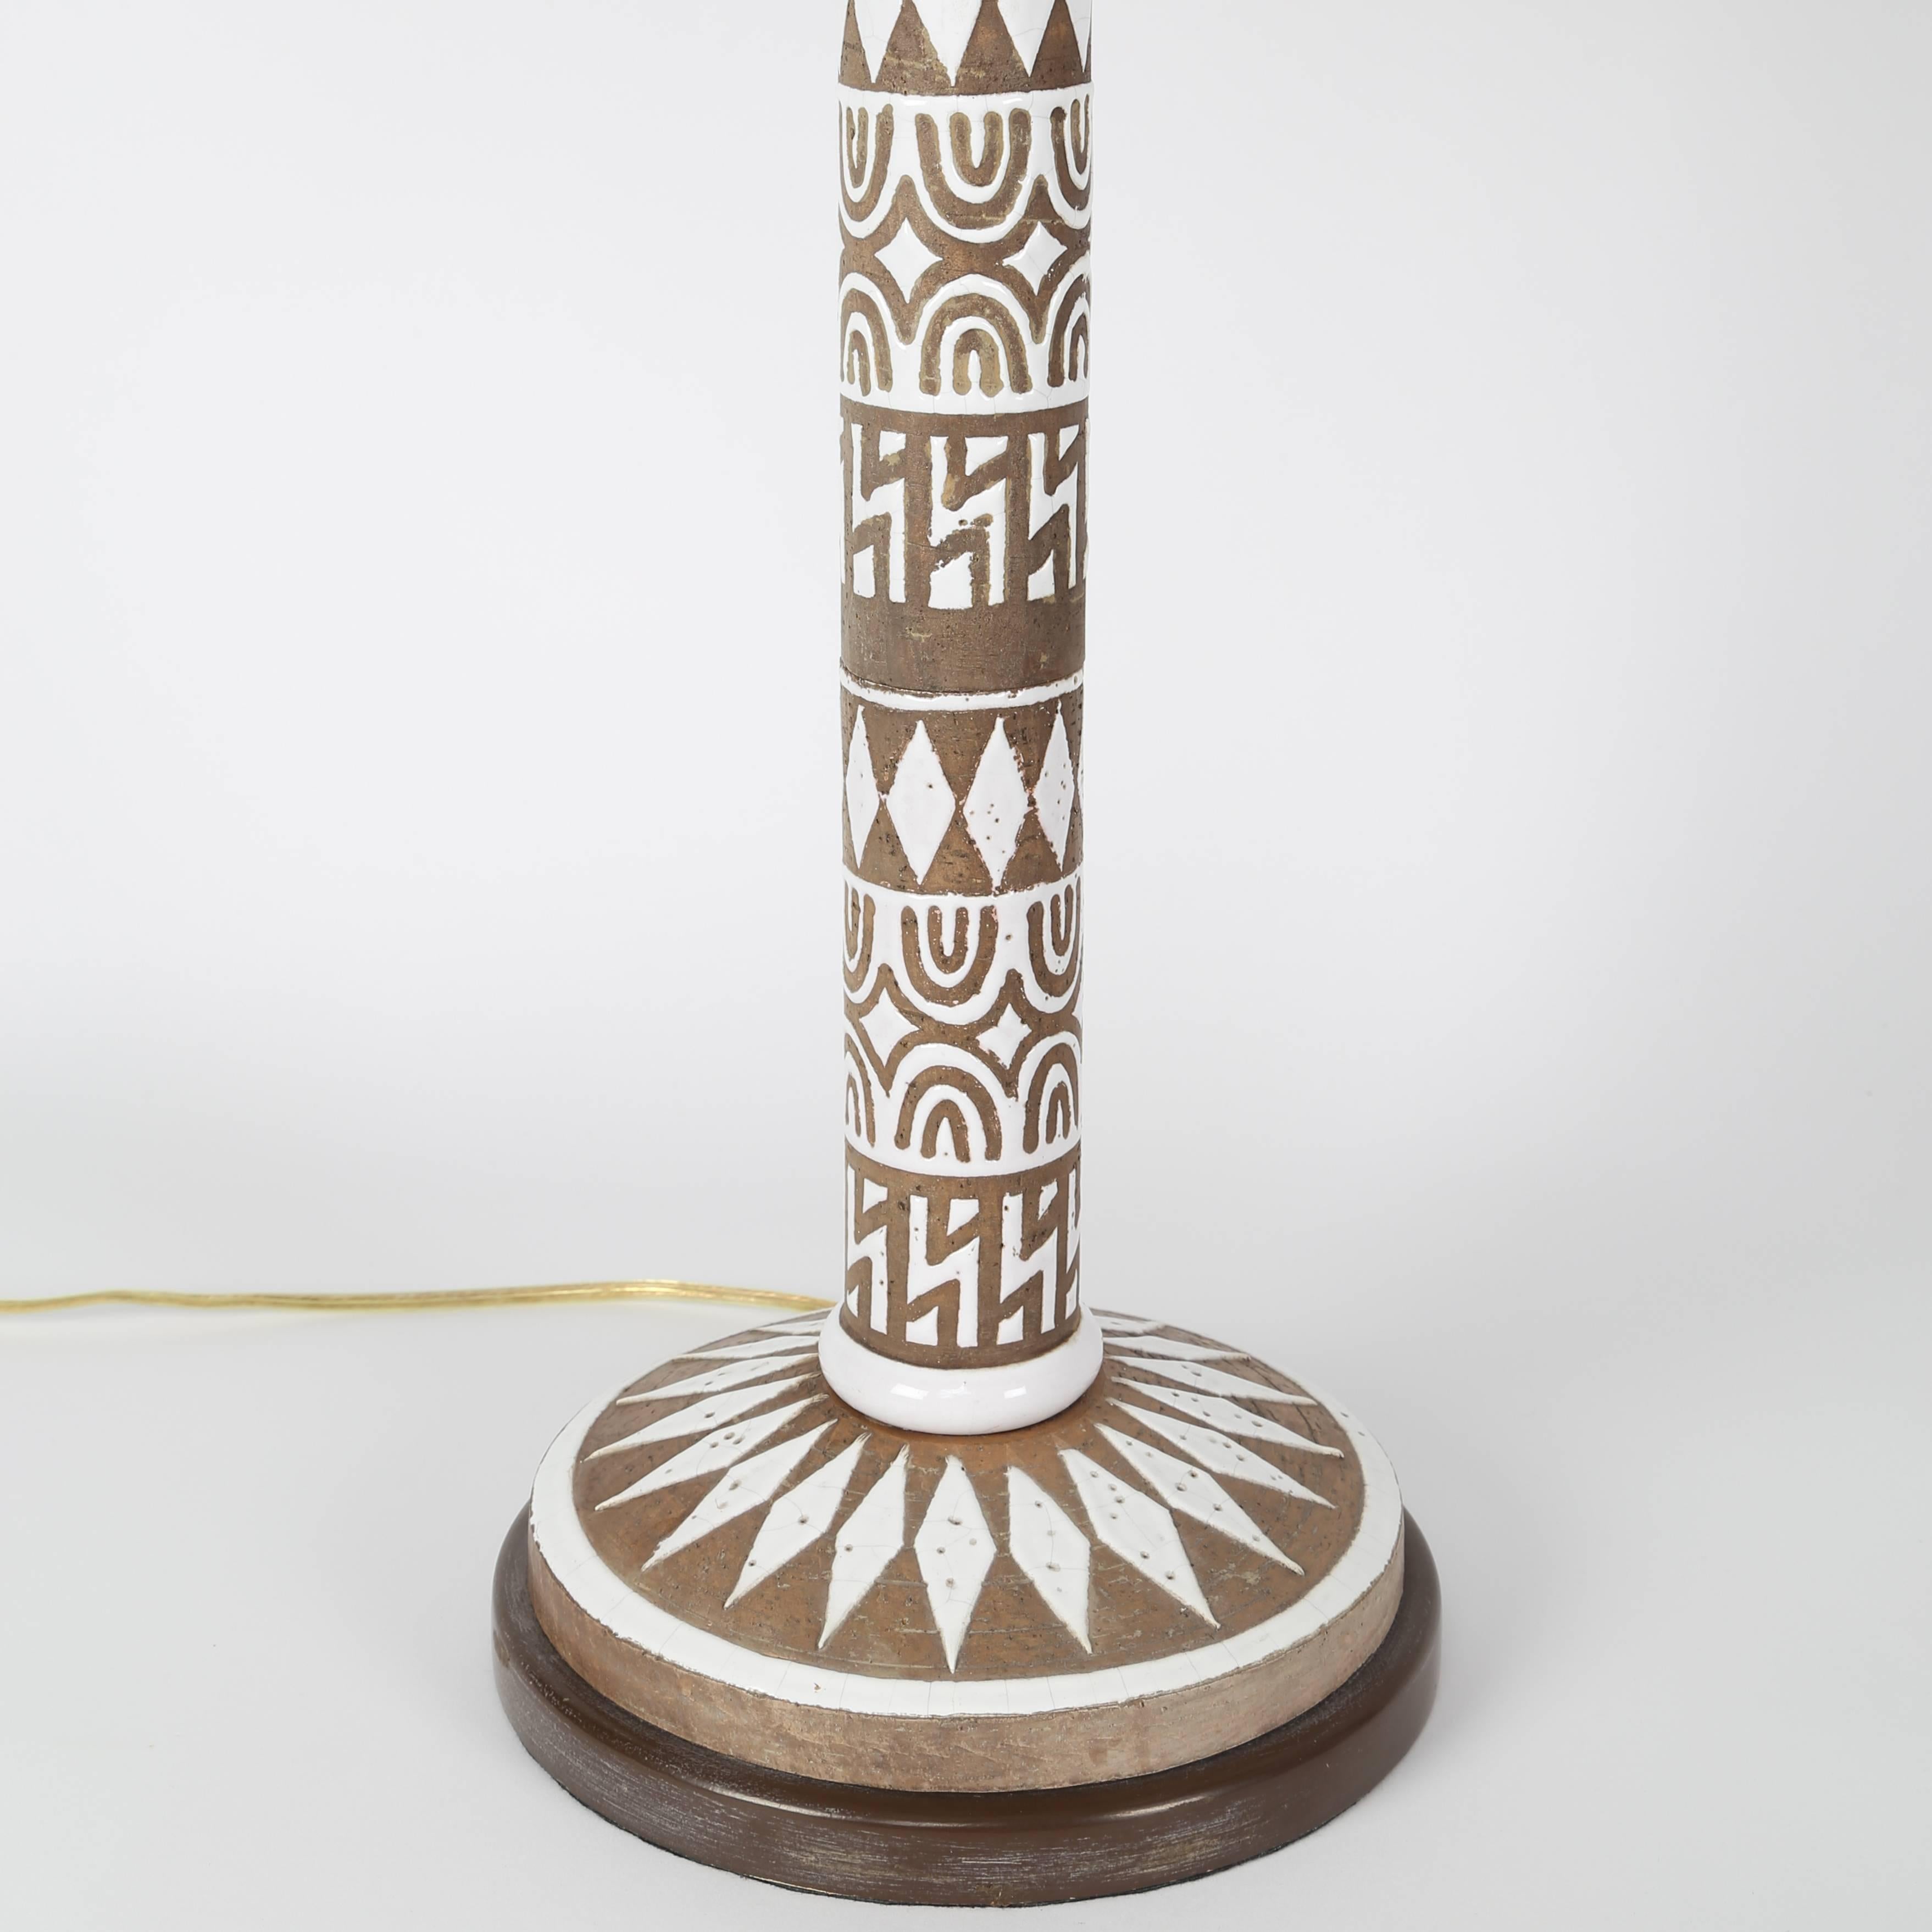 These dramatic Italian lamps feature hand-painted, white-glazed designs of diamonds, zigzags and arches on a brown ceramic background. We came by these lamps separately. However, the design, size and bases are the same. They work as a pair, and that